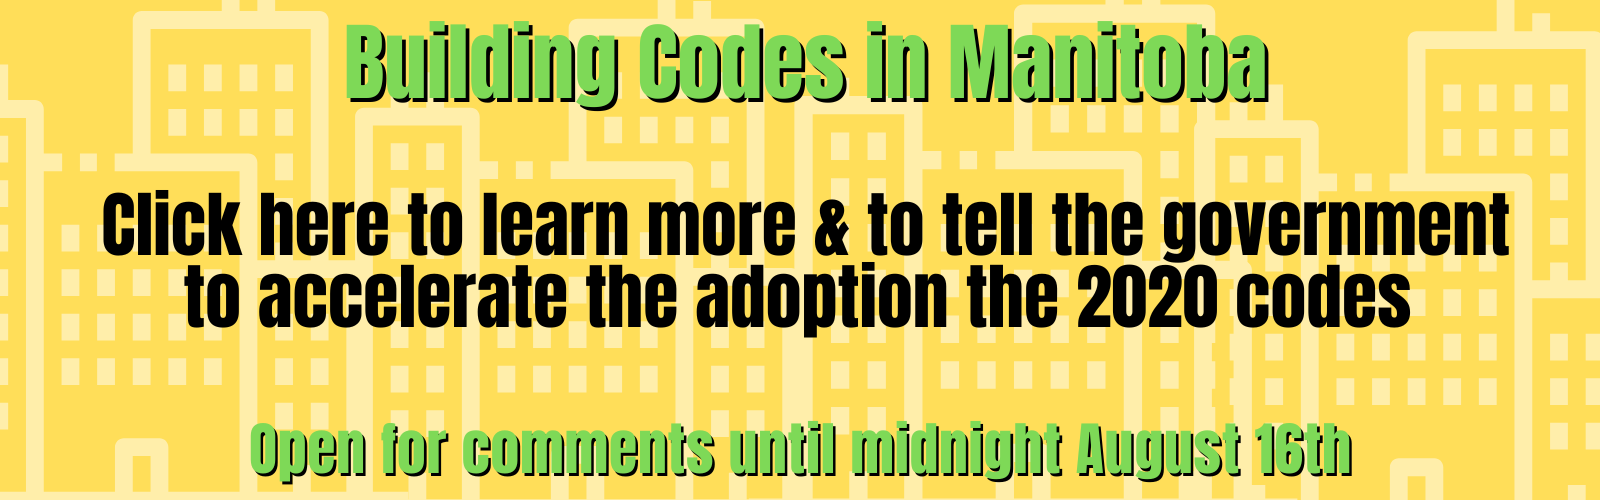 Building Codes in Manitoba Click here to learn more and to tell the government to accelerate the adoption of the 2020 codes open for comments until midnight August 16th